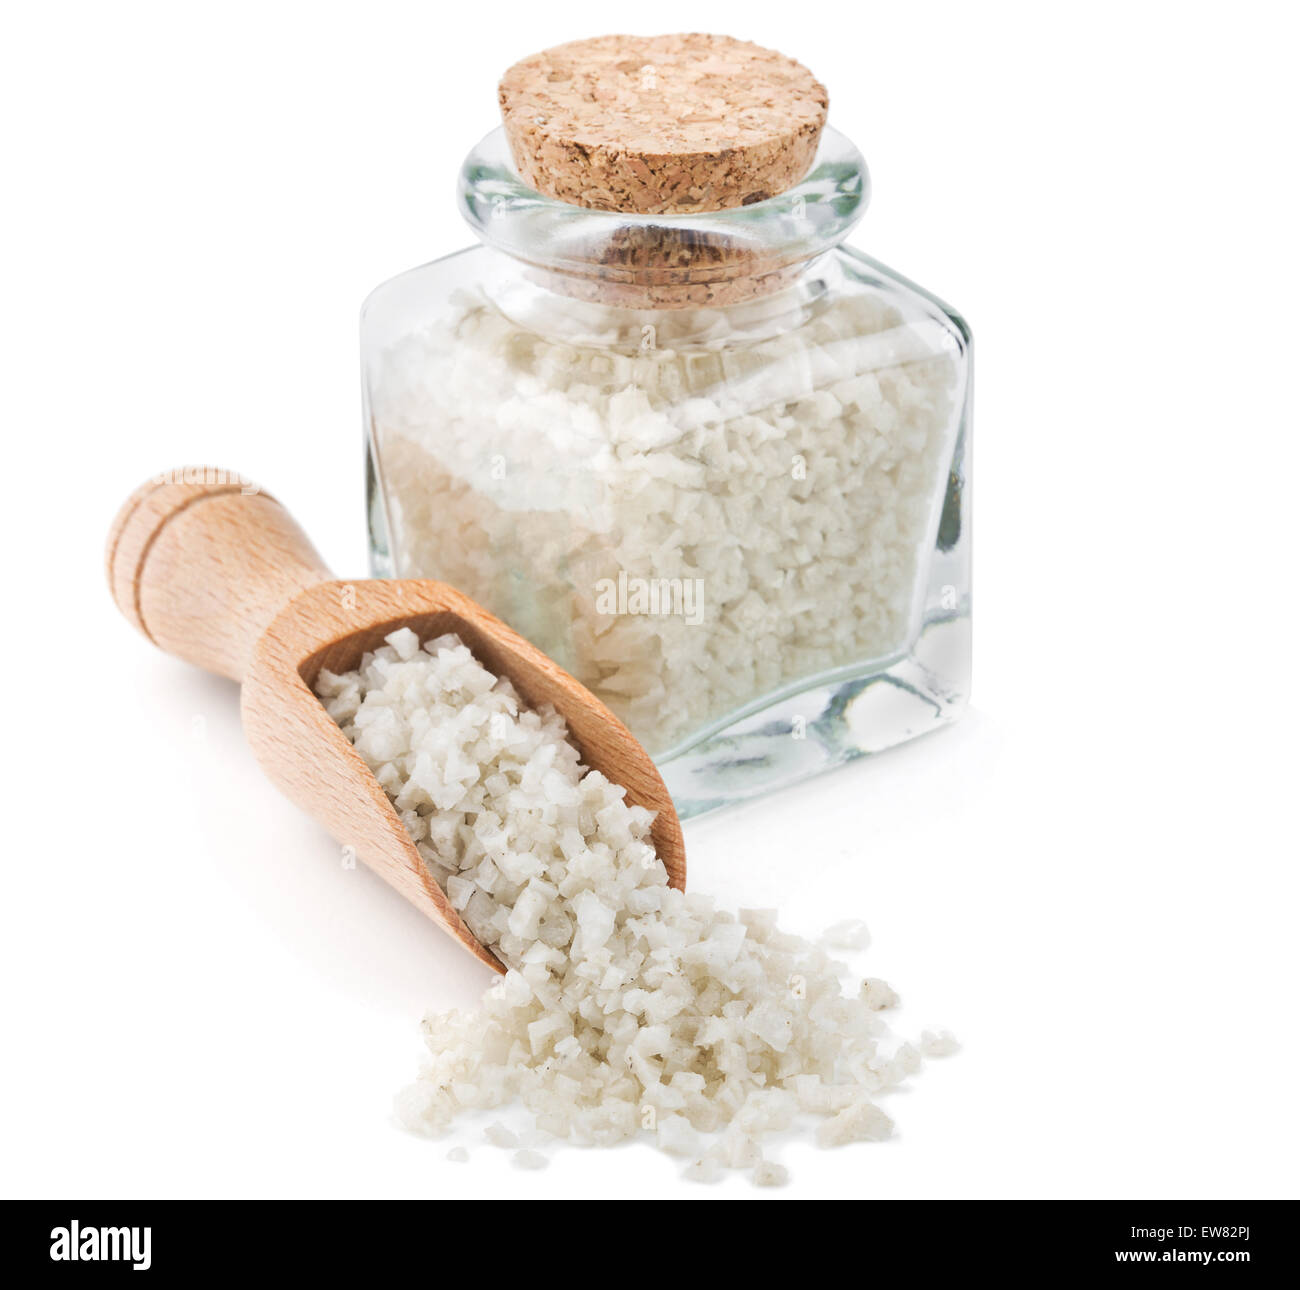 English gray salt in a glass bottle Stock Photo